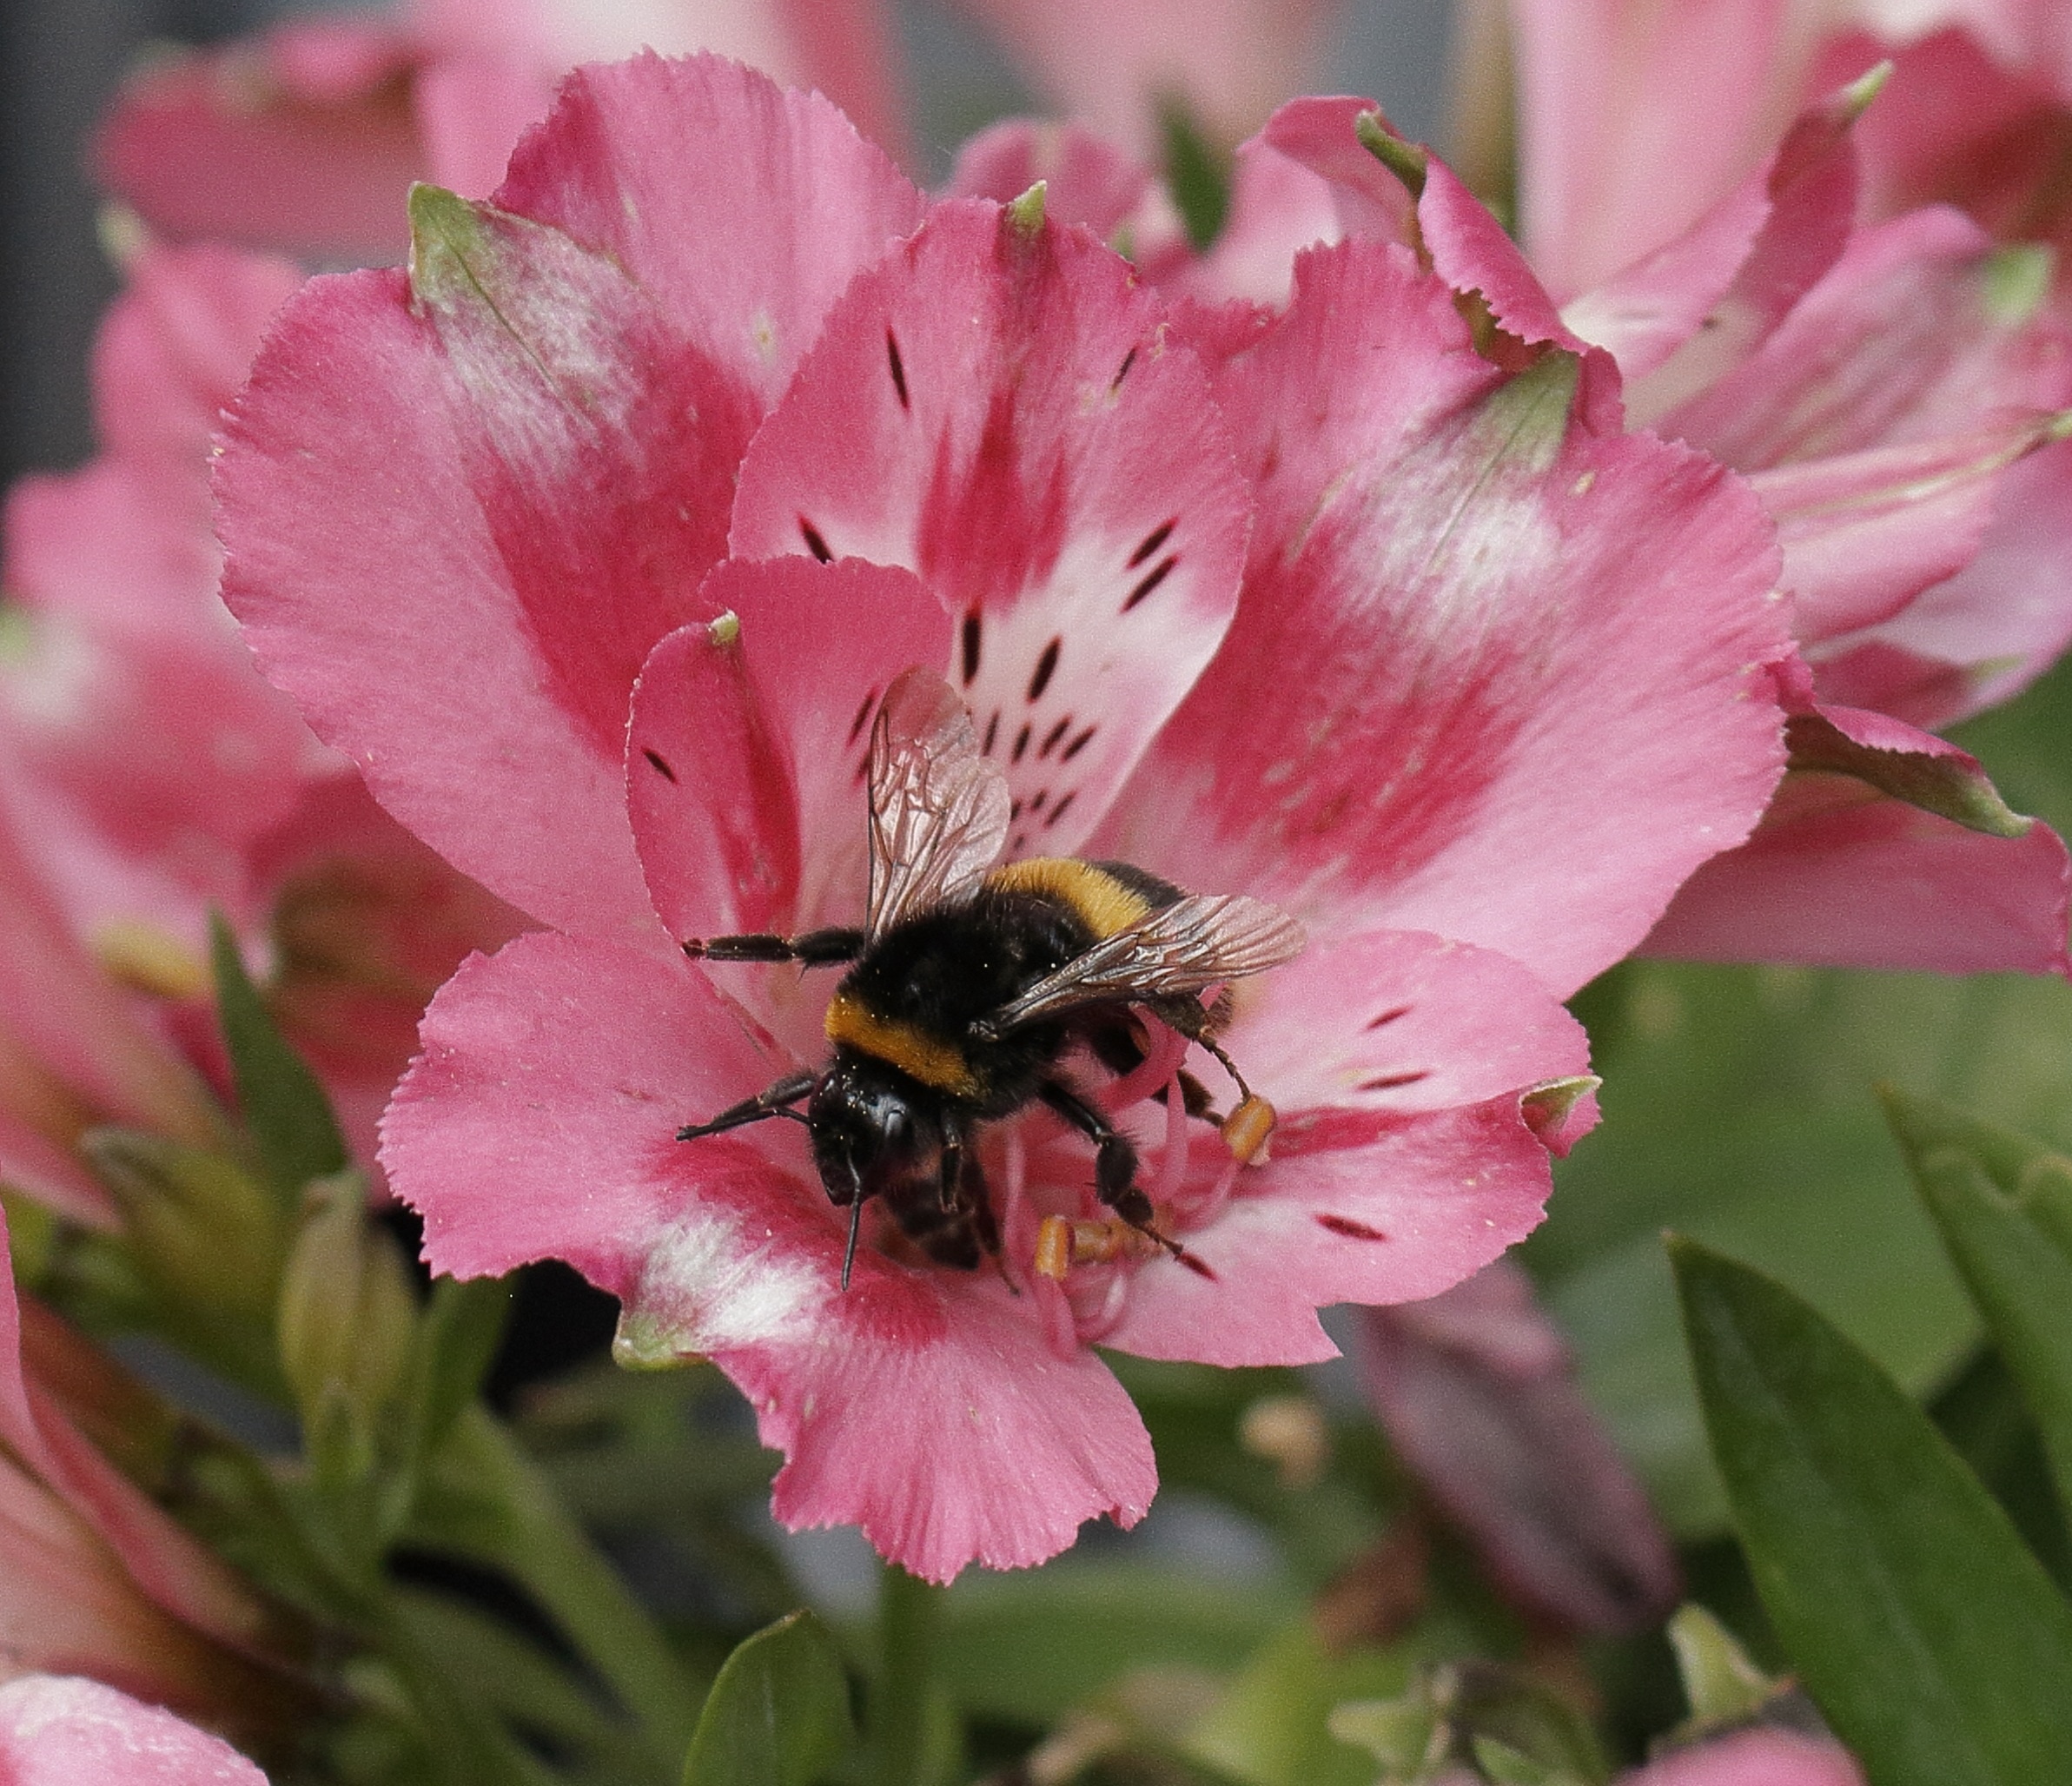 pink 6 petaled flower with yellow stigma and bee